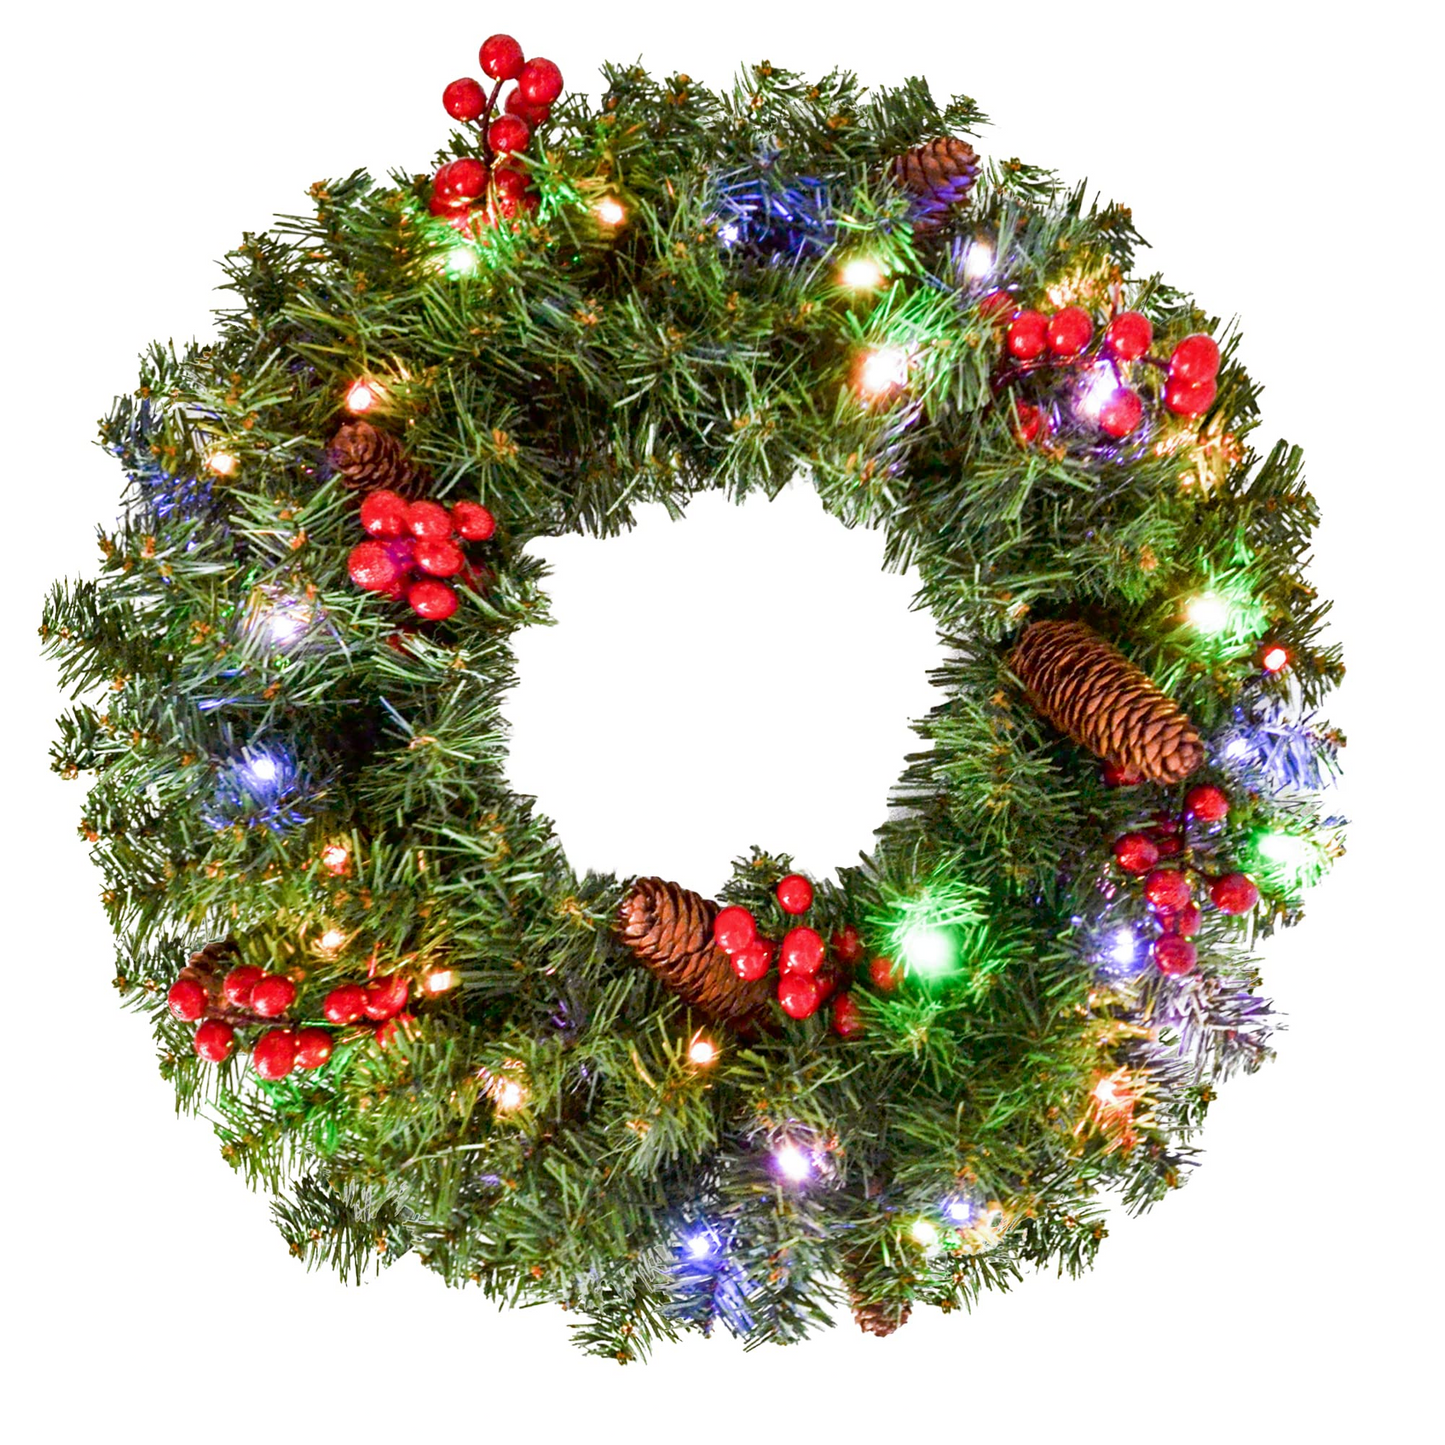 20in Christmas Holiday Wreath with Multicolored Lights